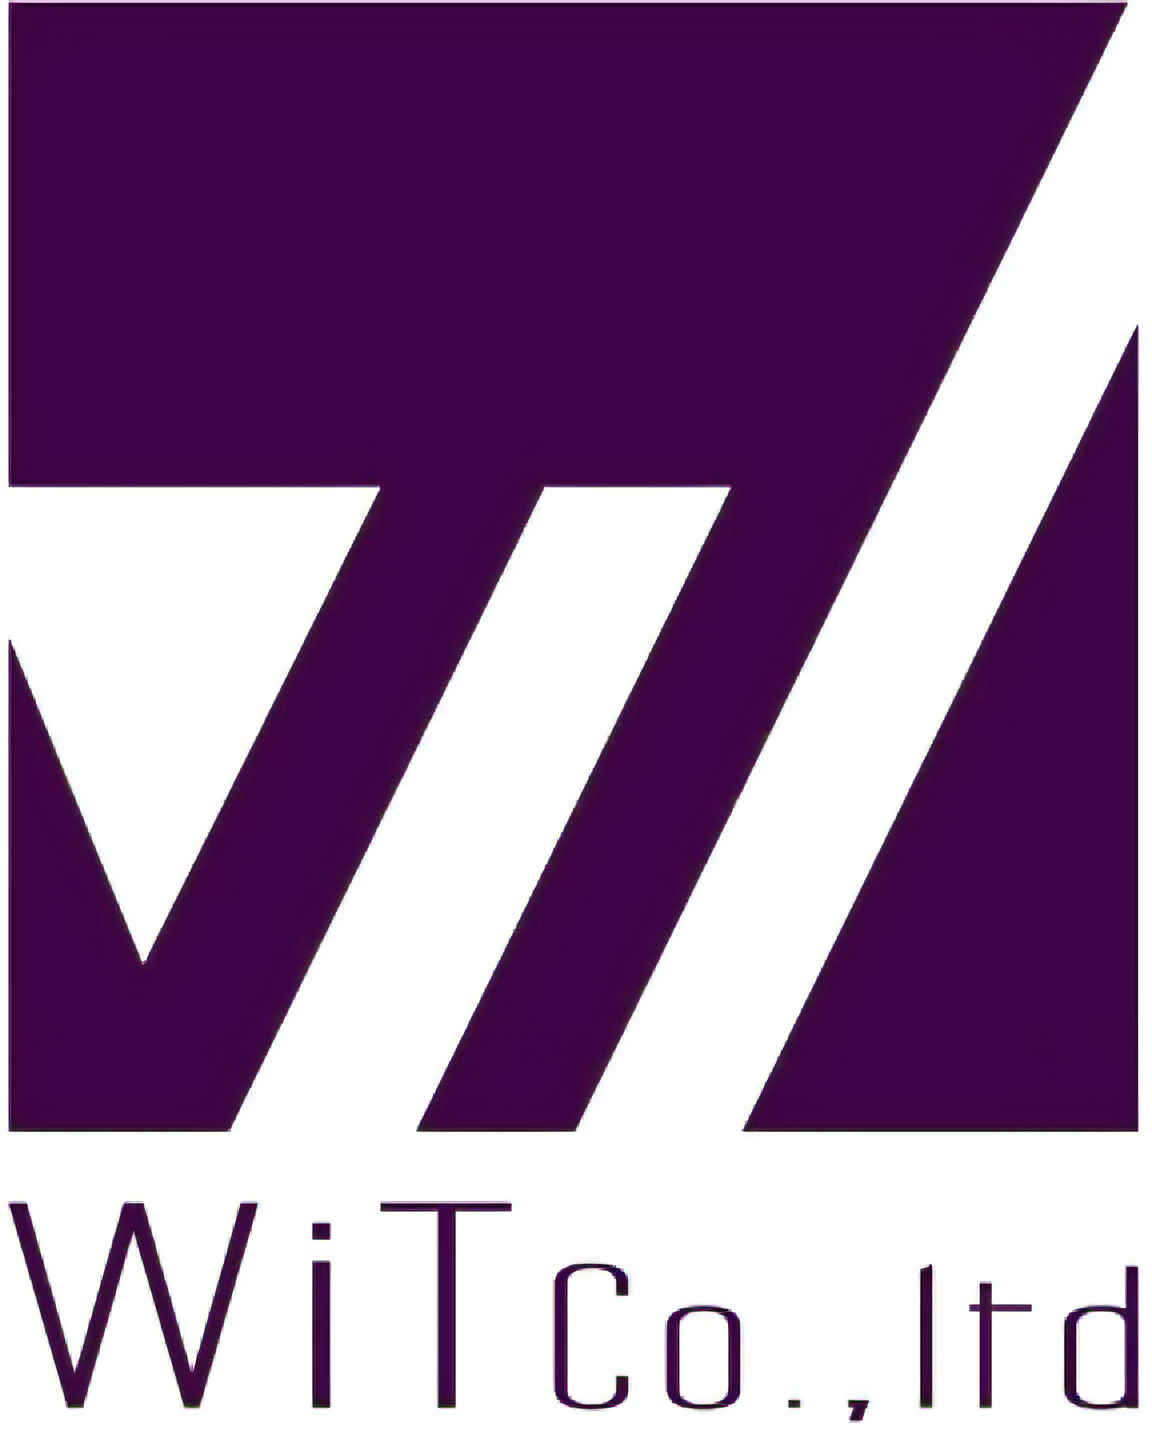 LIFEWIT Trademark of EASTWEST ELECTRONIC COMMERCE CO., LIMITED -  Registration Number 5561682 - Serial Number 87212177 :: Justia Trademarks